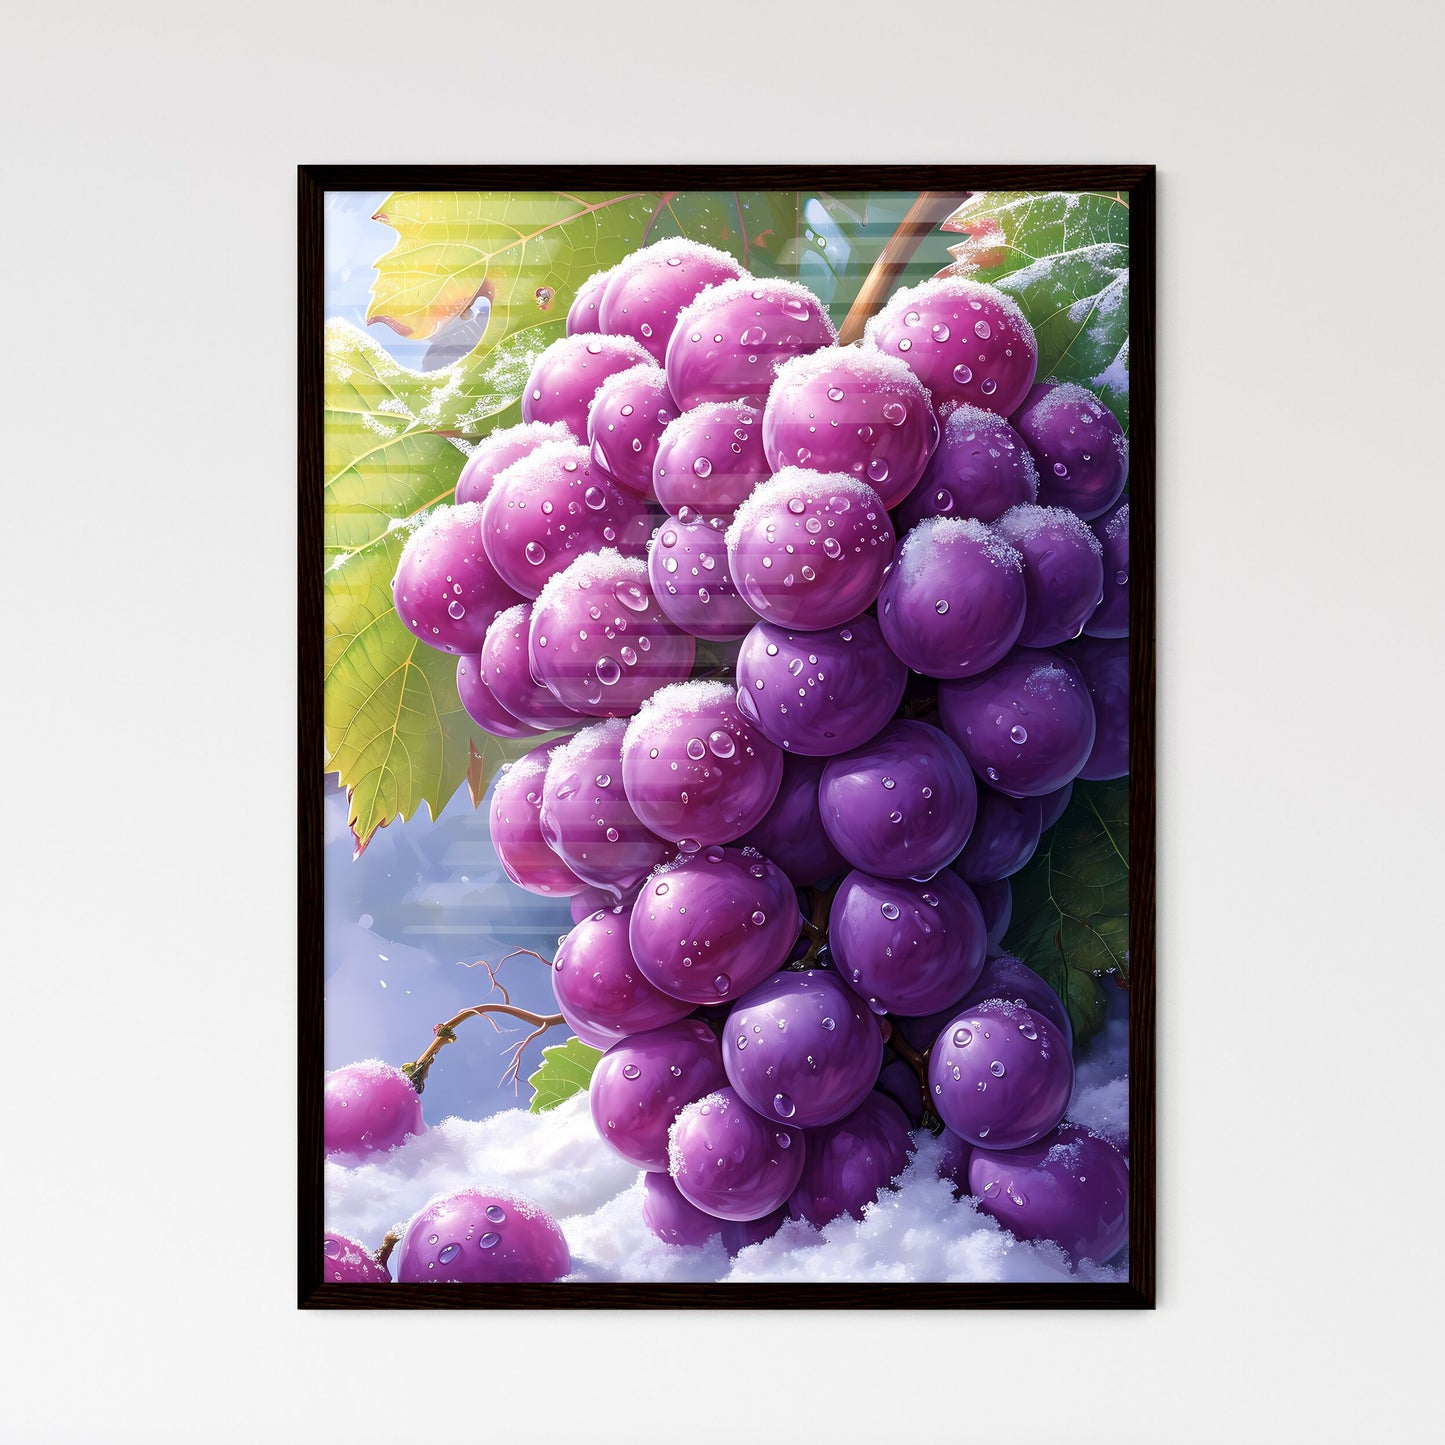 A bunch of purple grapes covered in snow - Art print of a close up of a grape Default Title